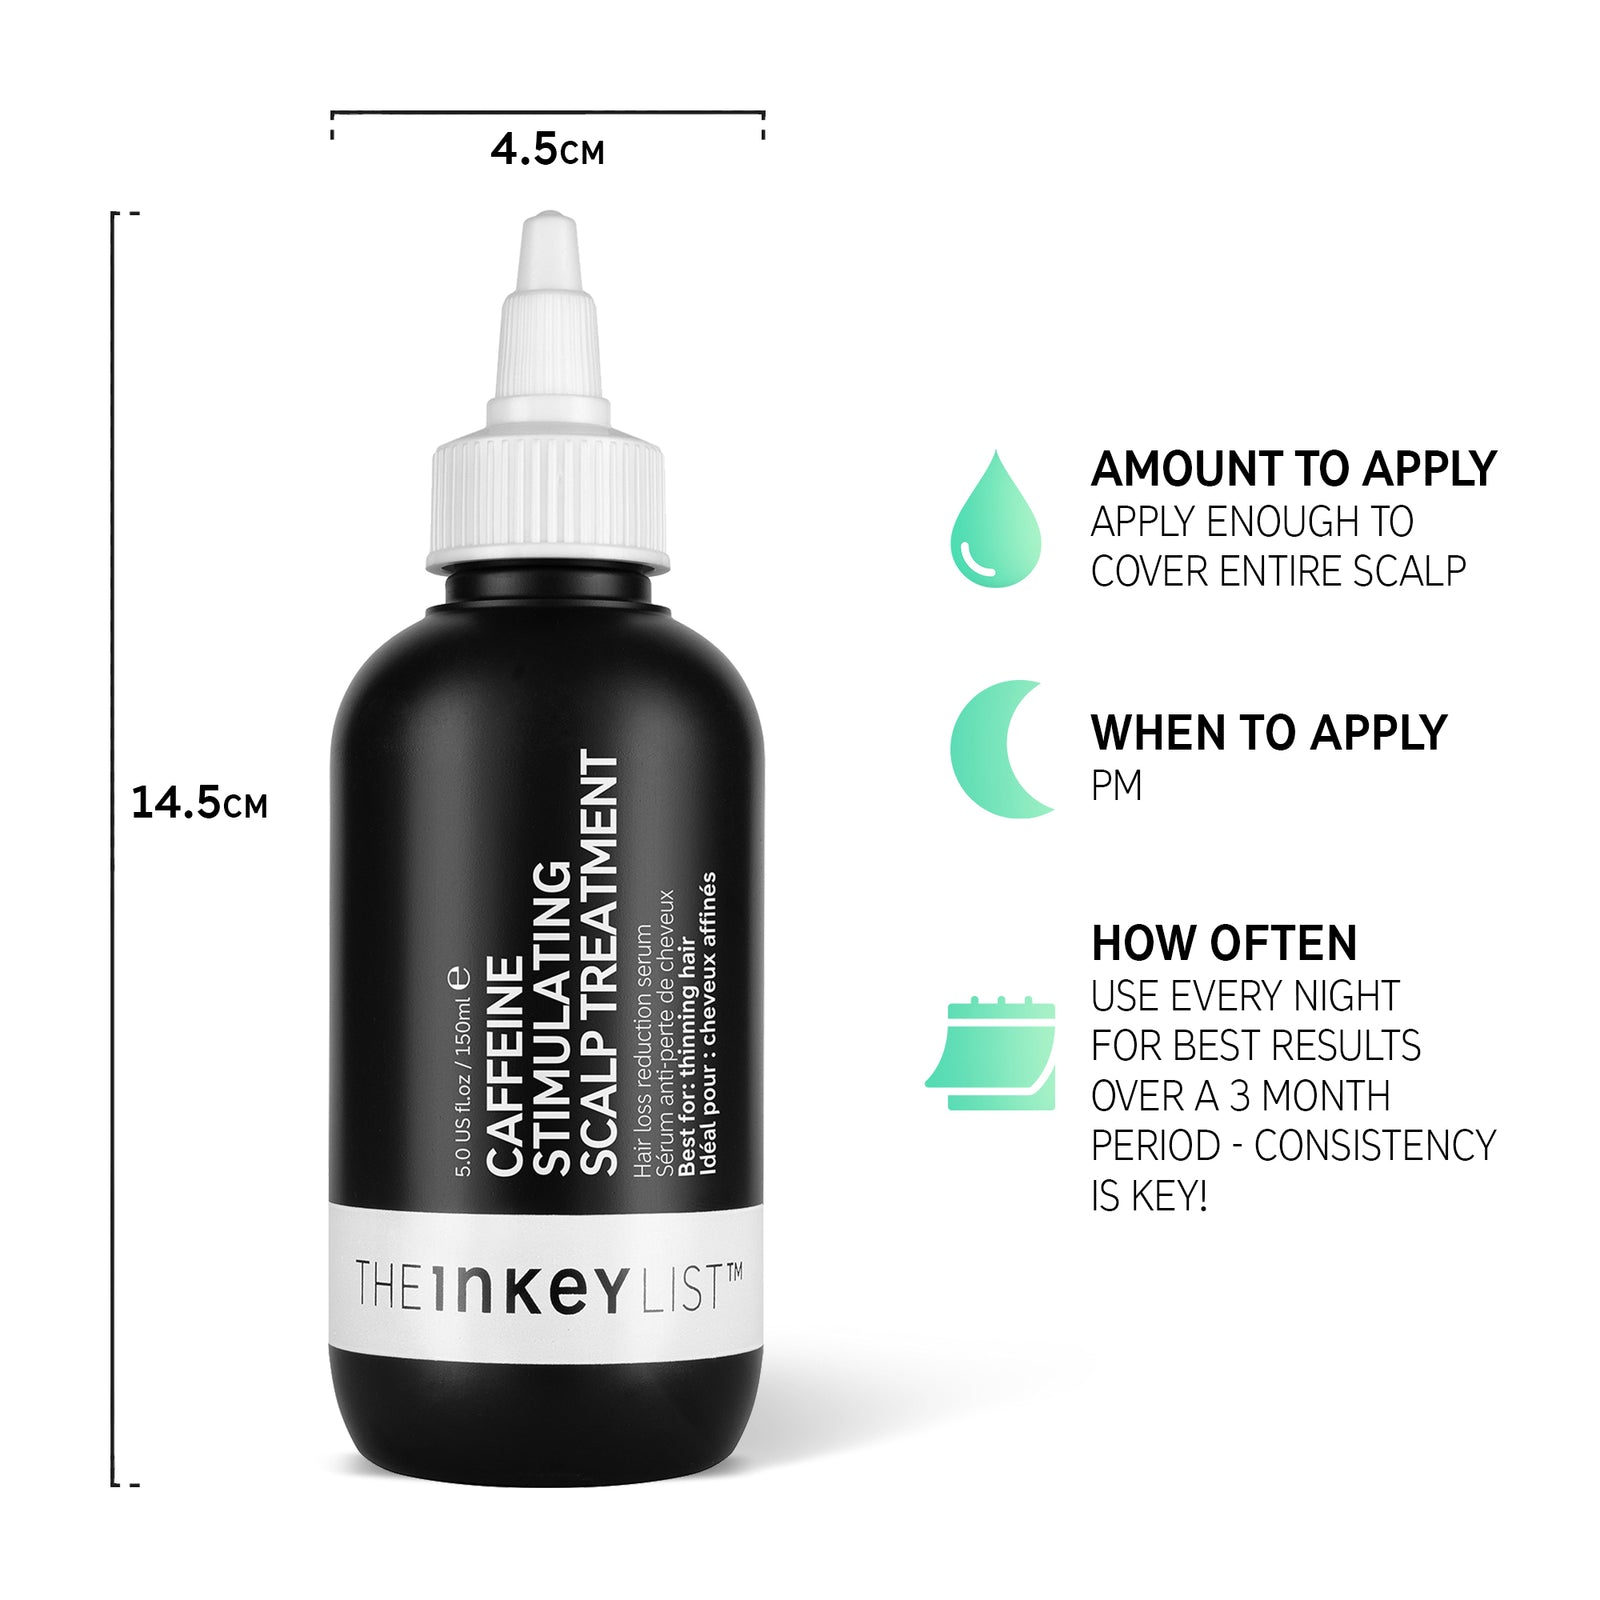 Hair Growth & Volume Duo Caffeine Scalp Treatment bottle infographic with product usage description